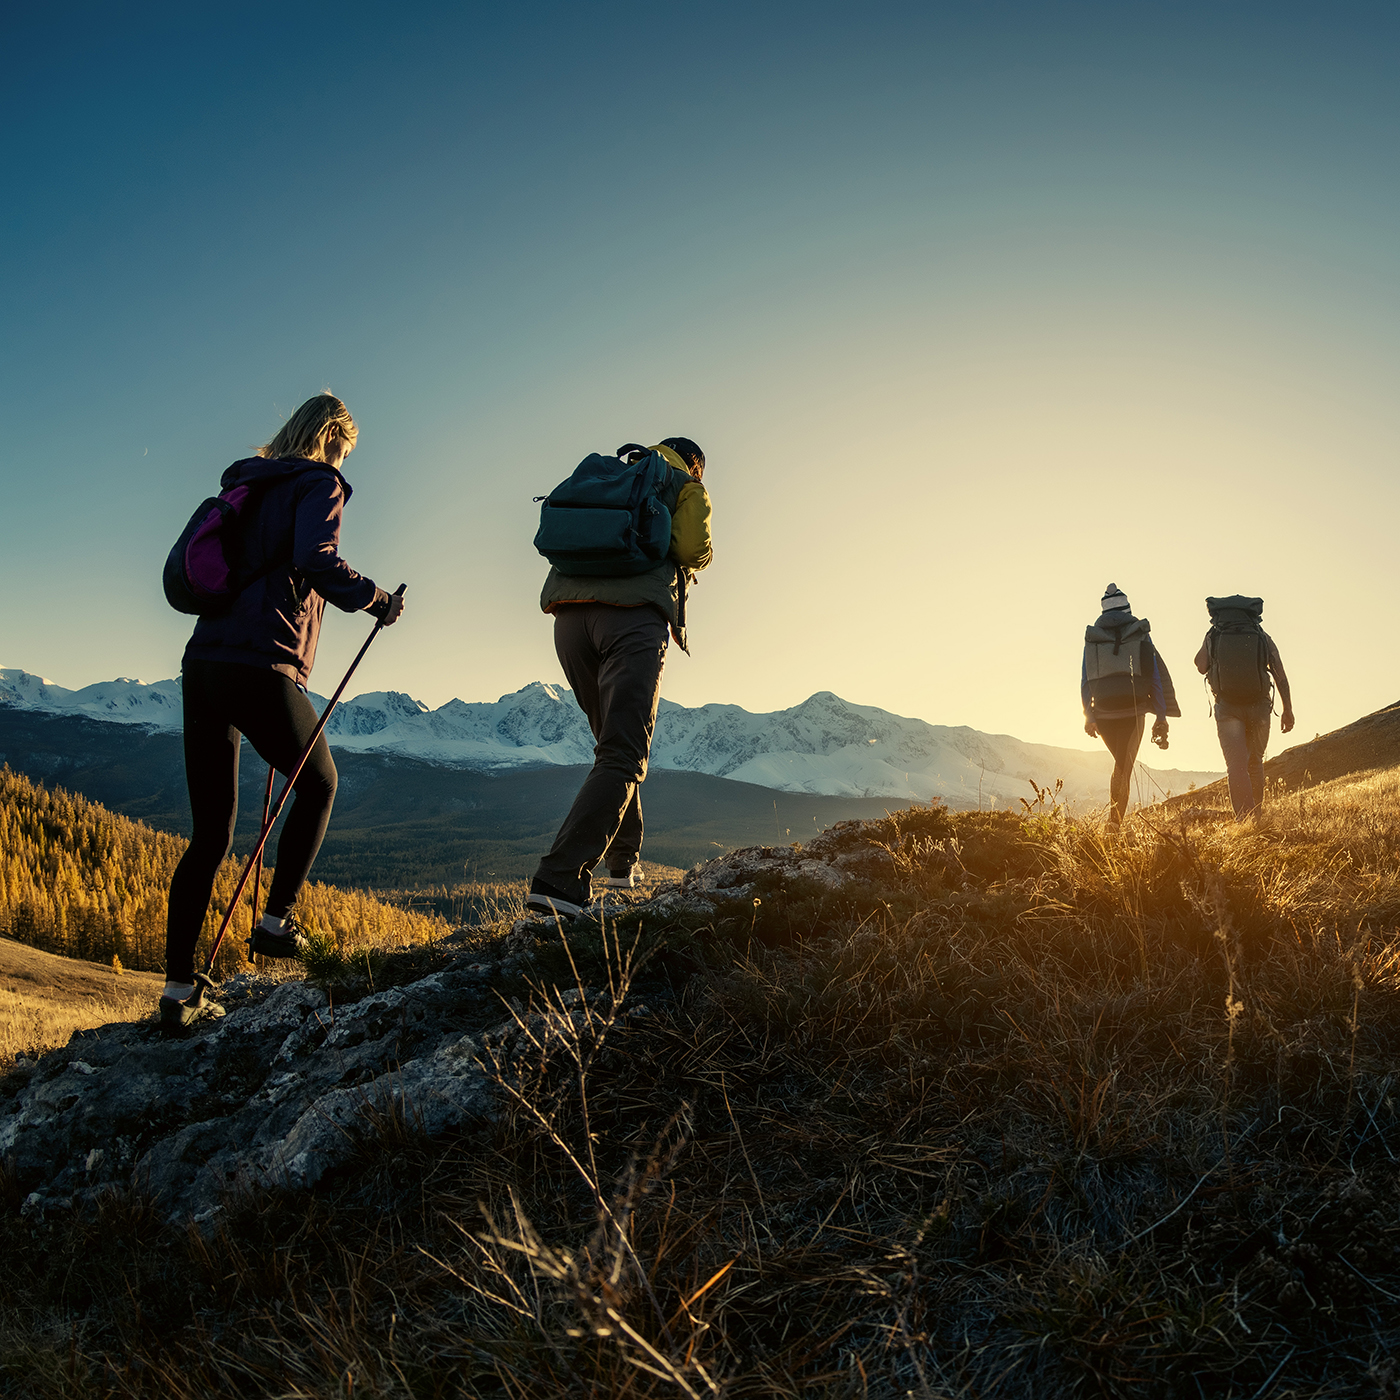 Group of hikers walks in mountains at sunset